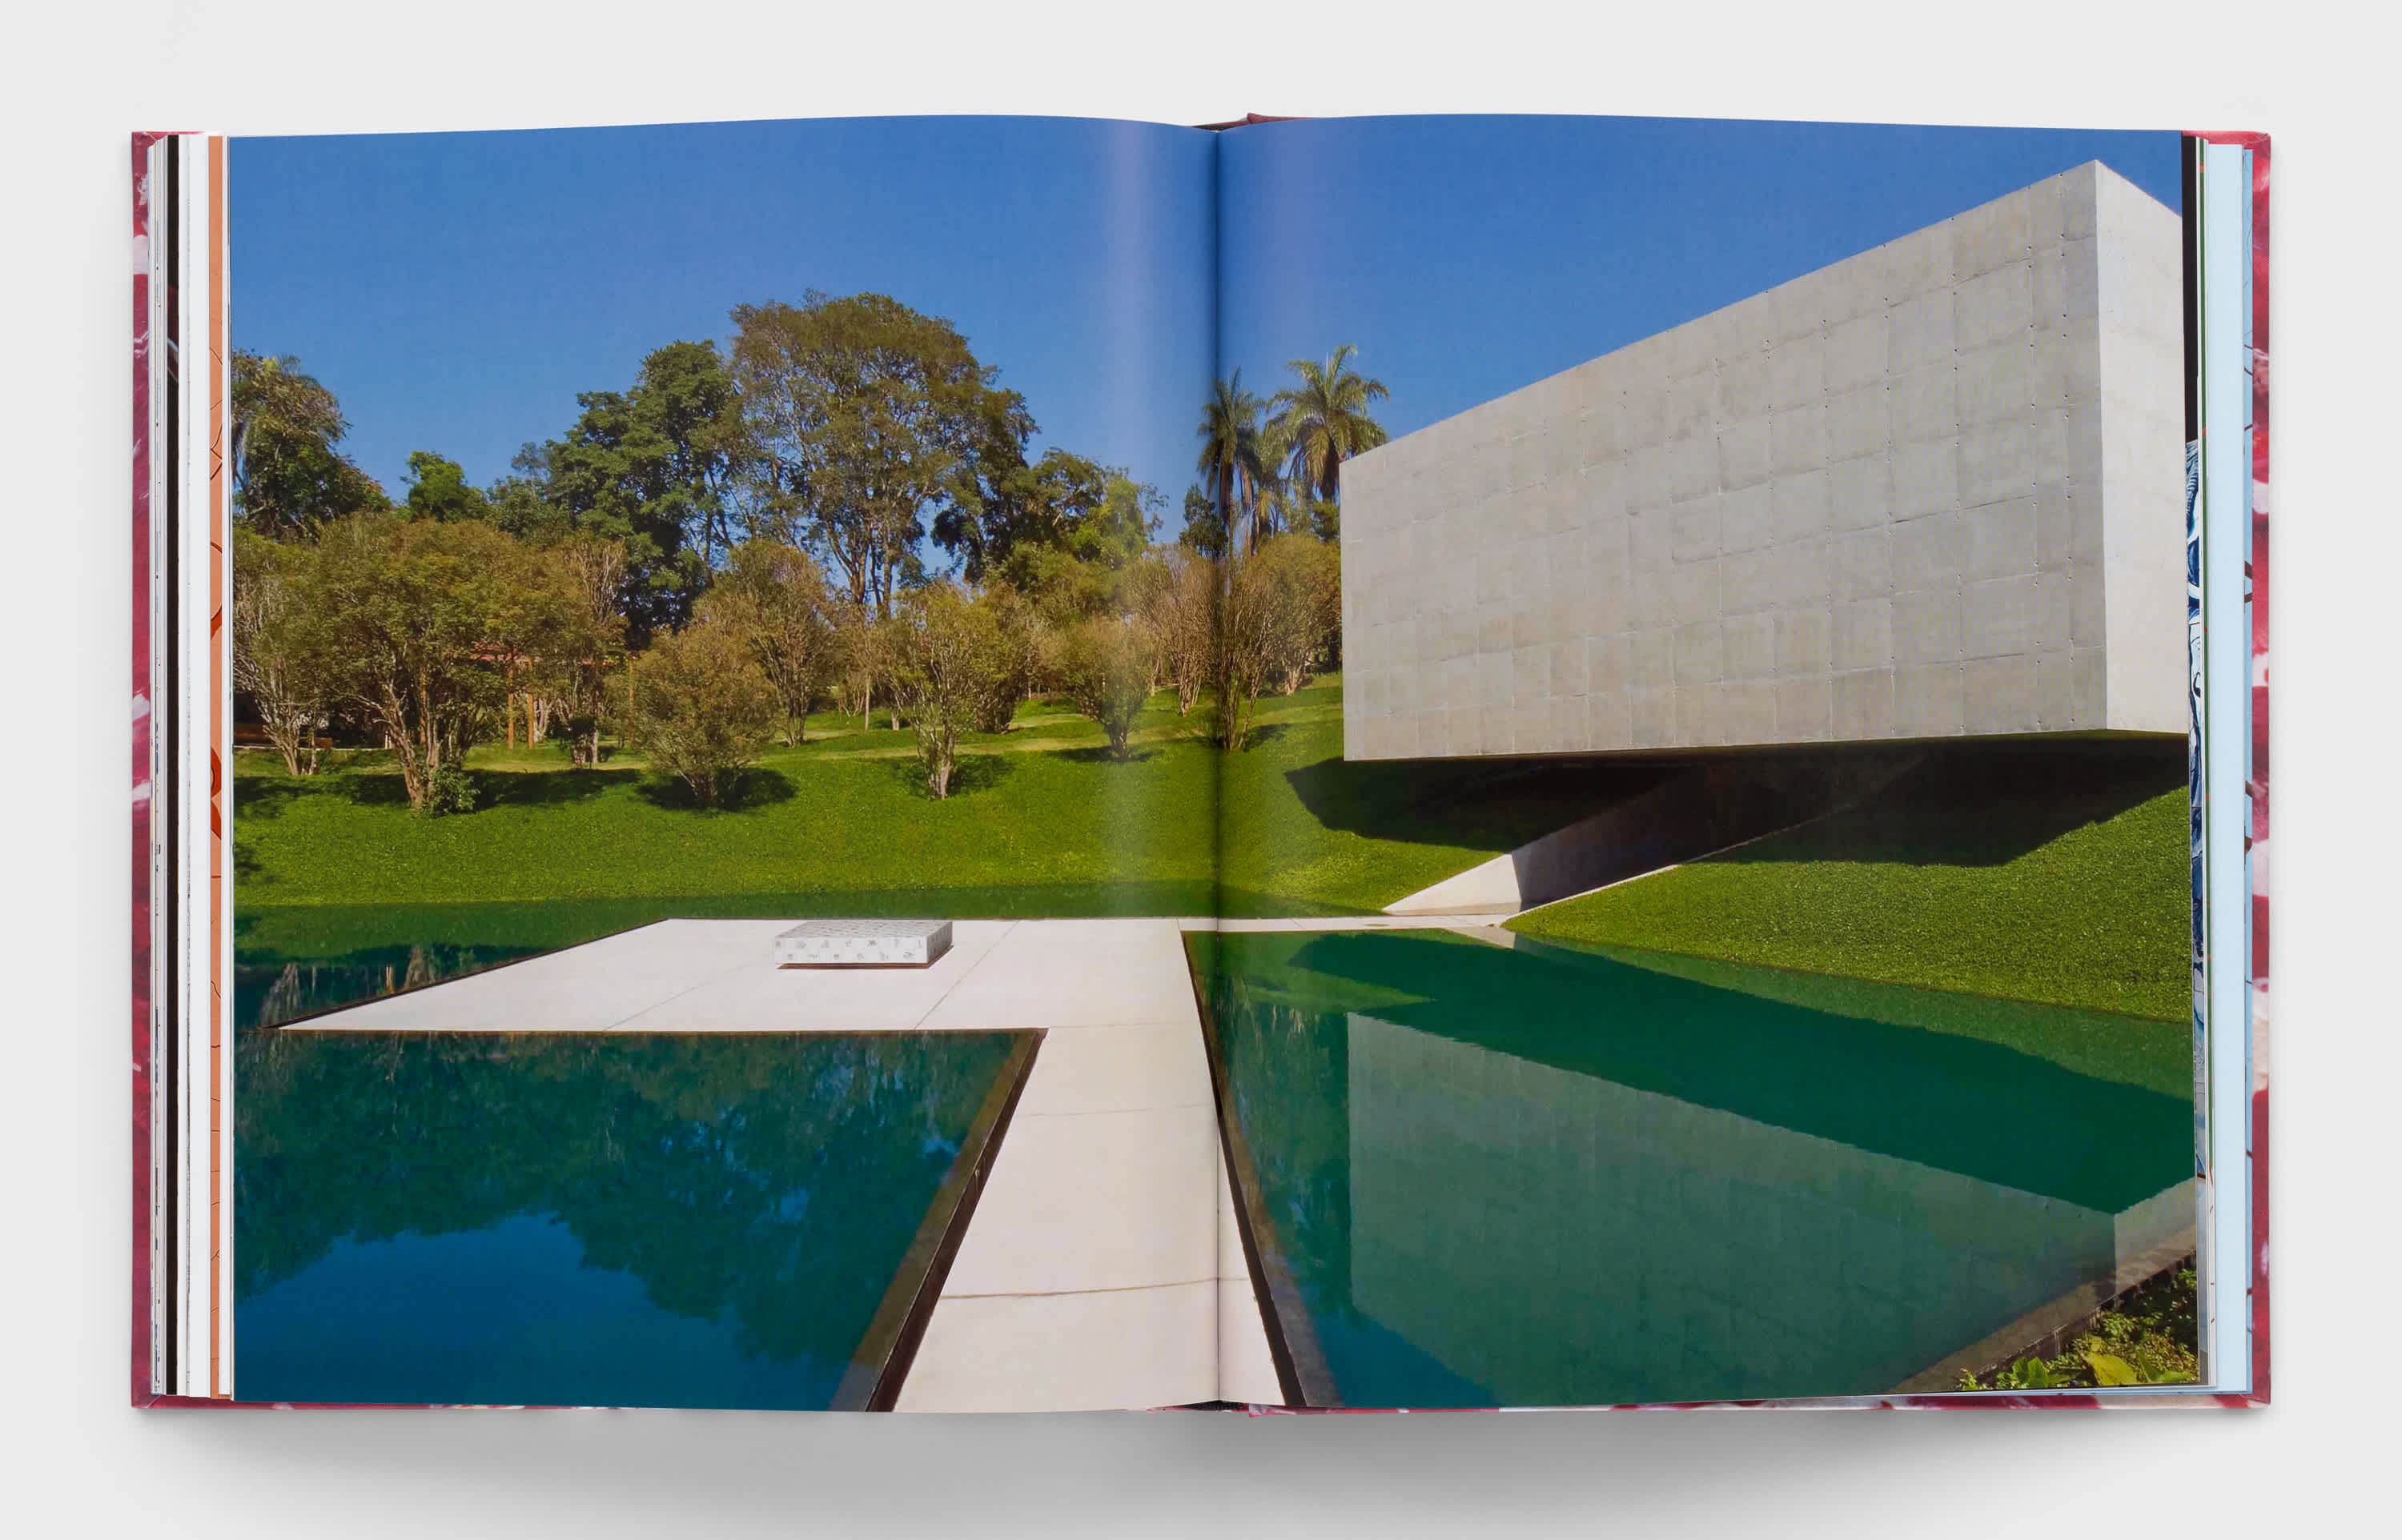 Open book with centerfold of landscape showing trees, a concrete building and swimming pool.